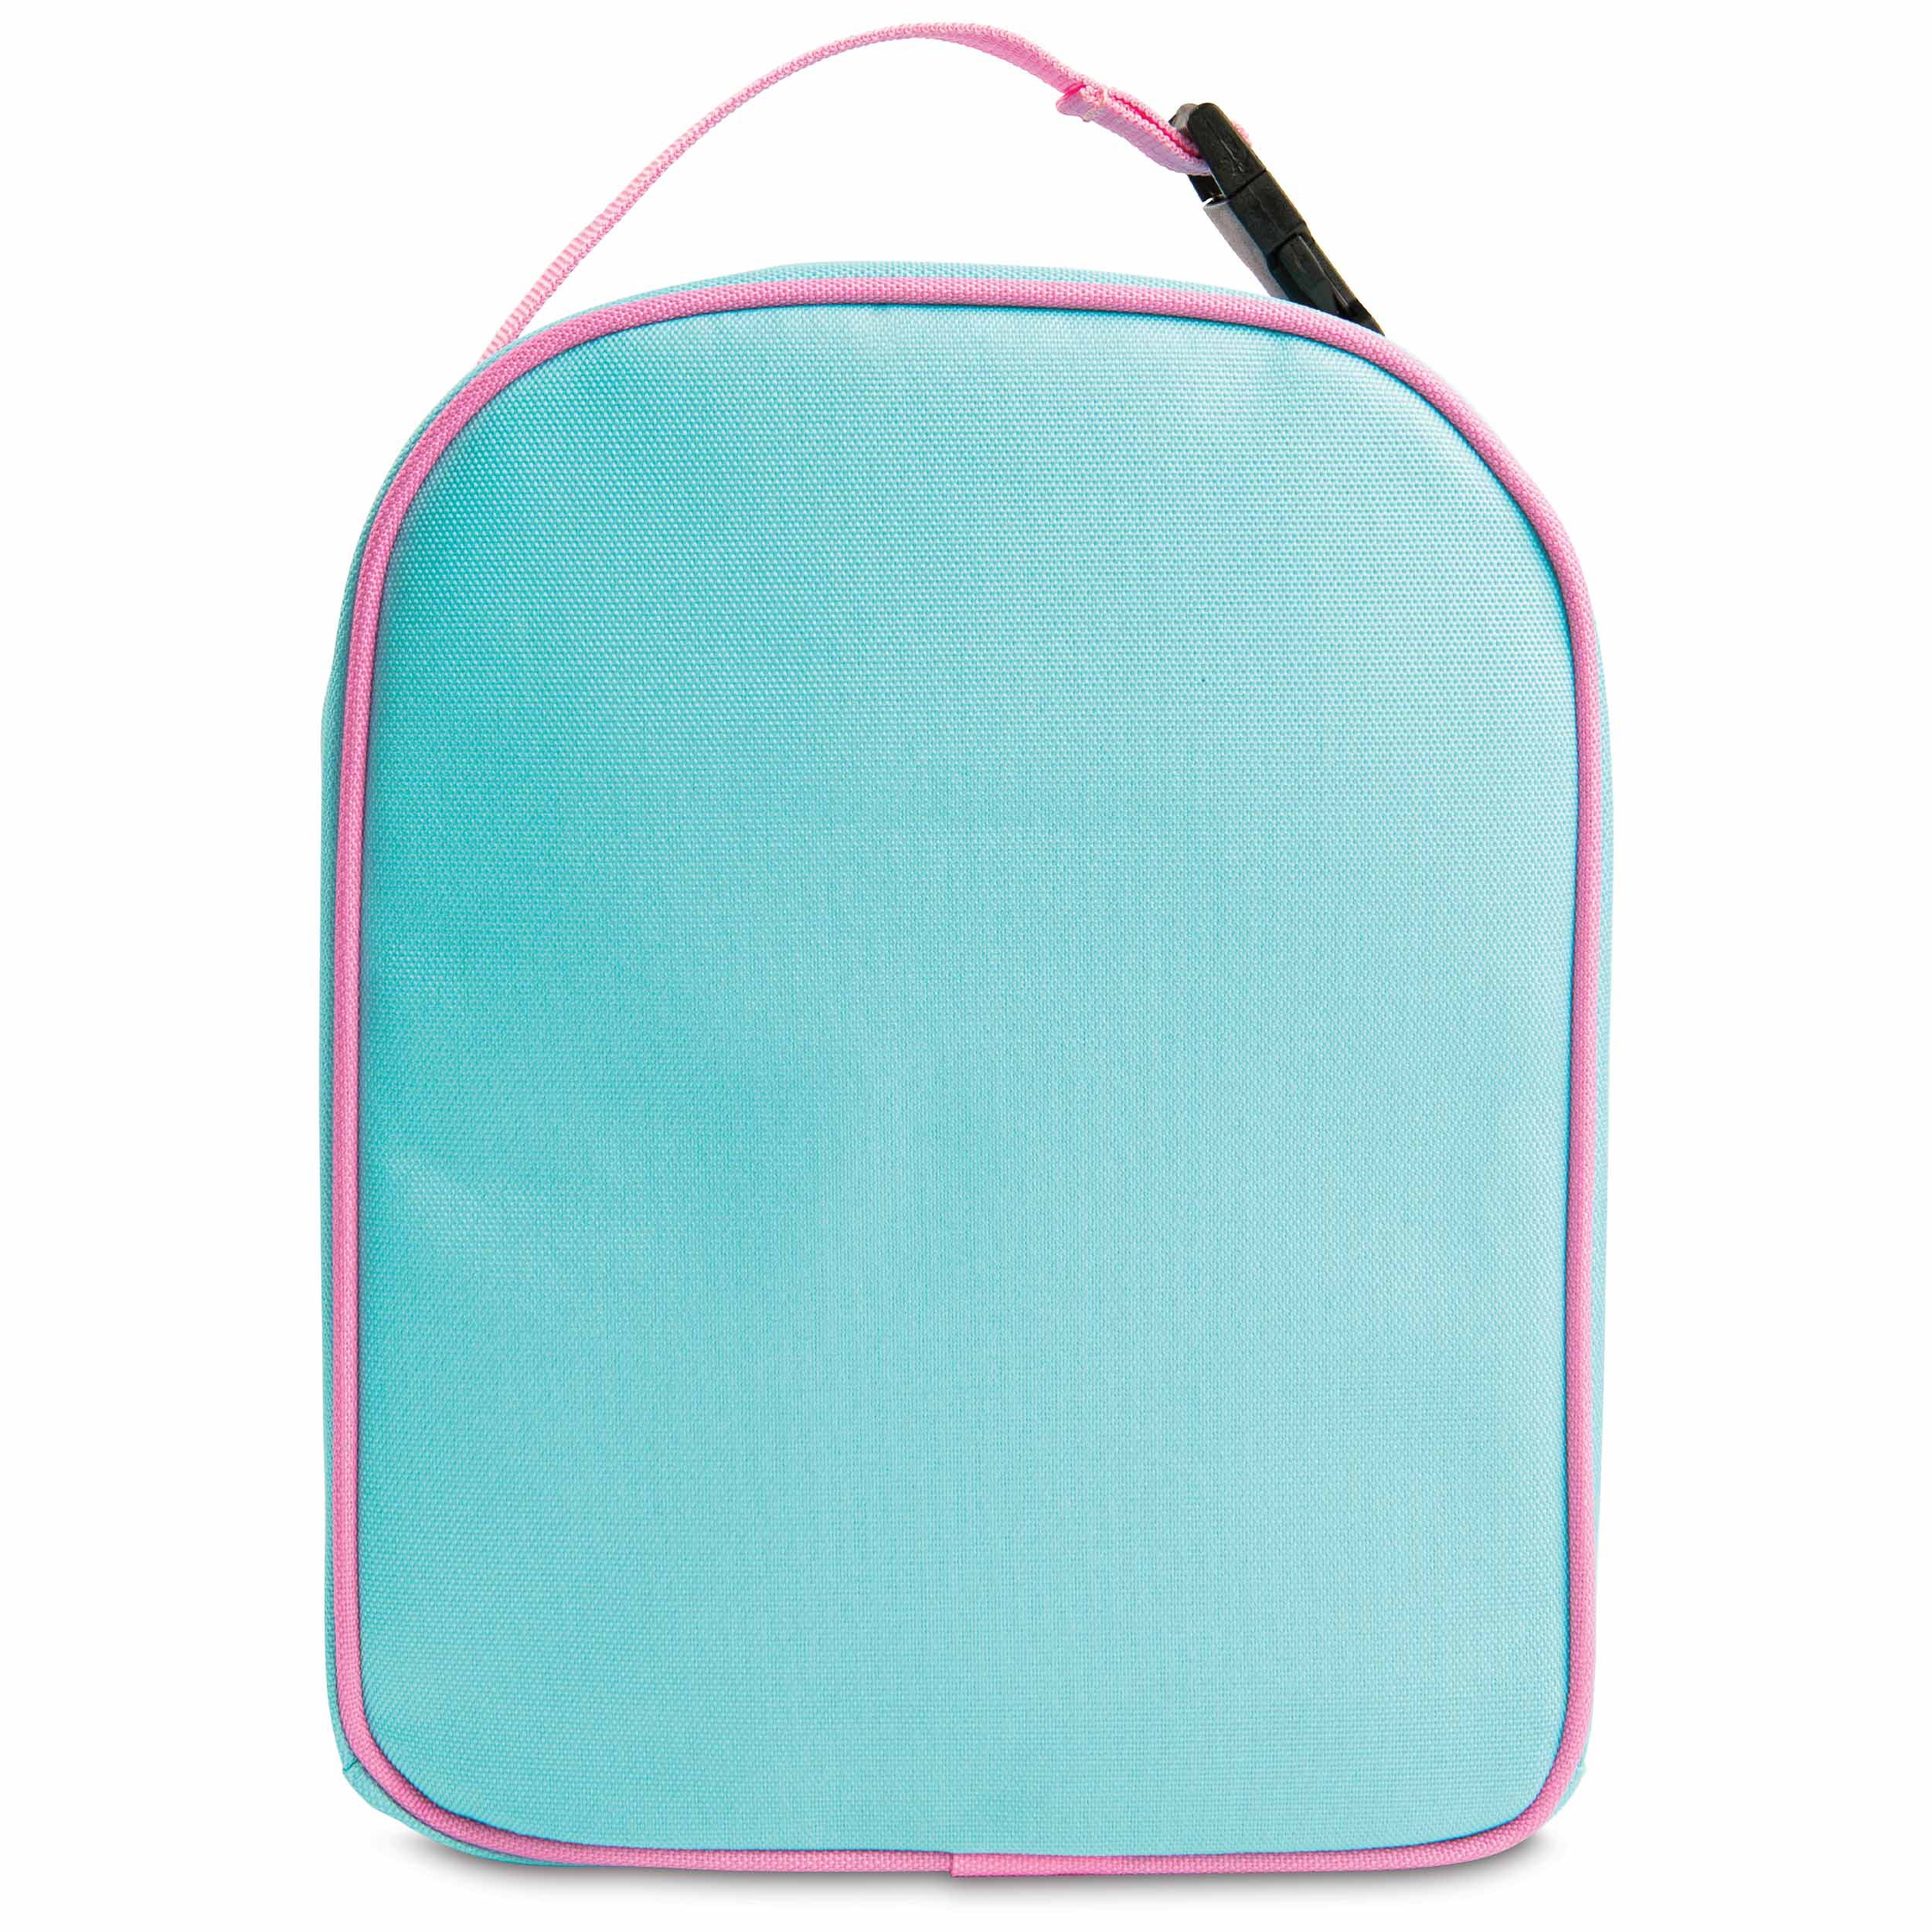 Freezable Playtime Lunch Box